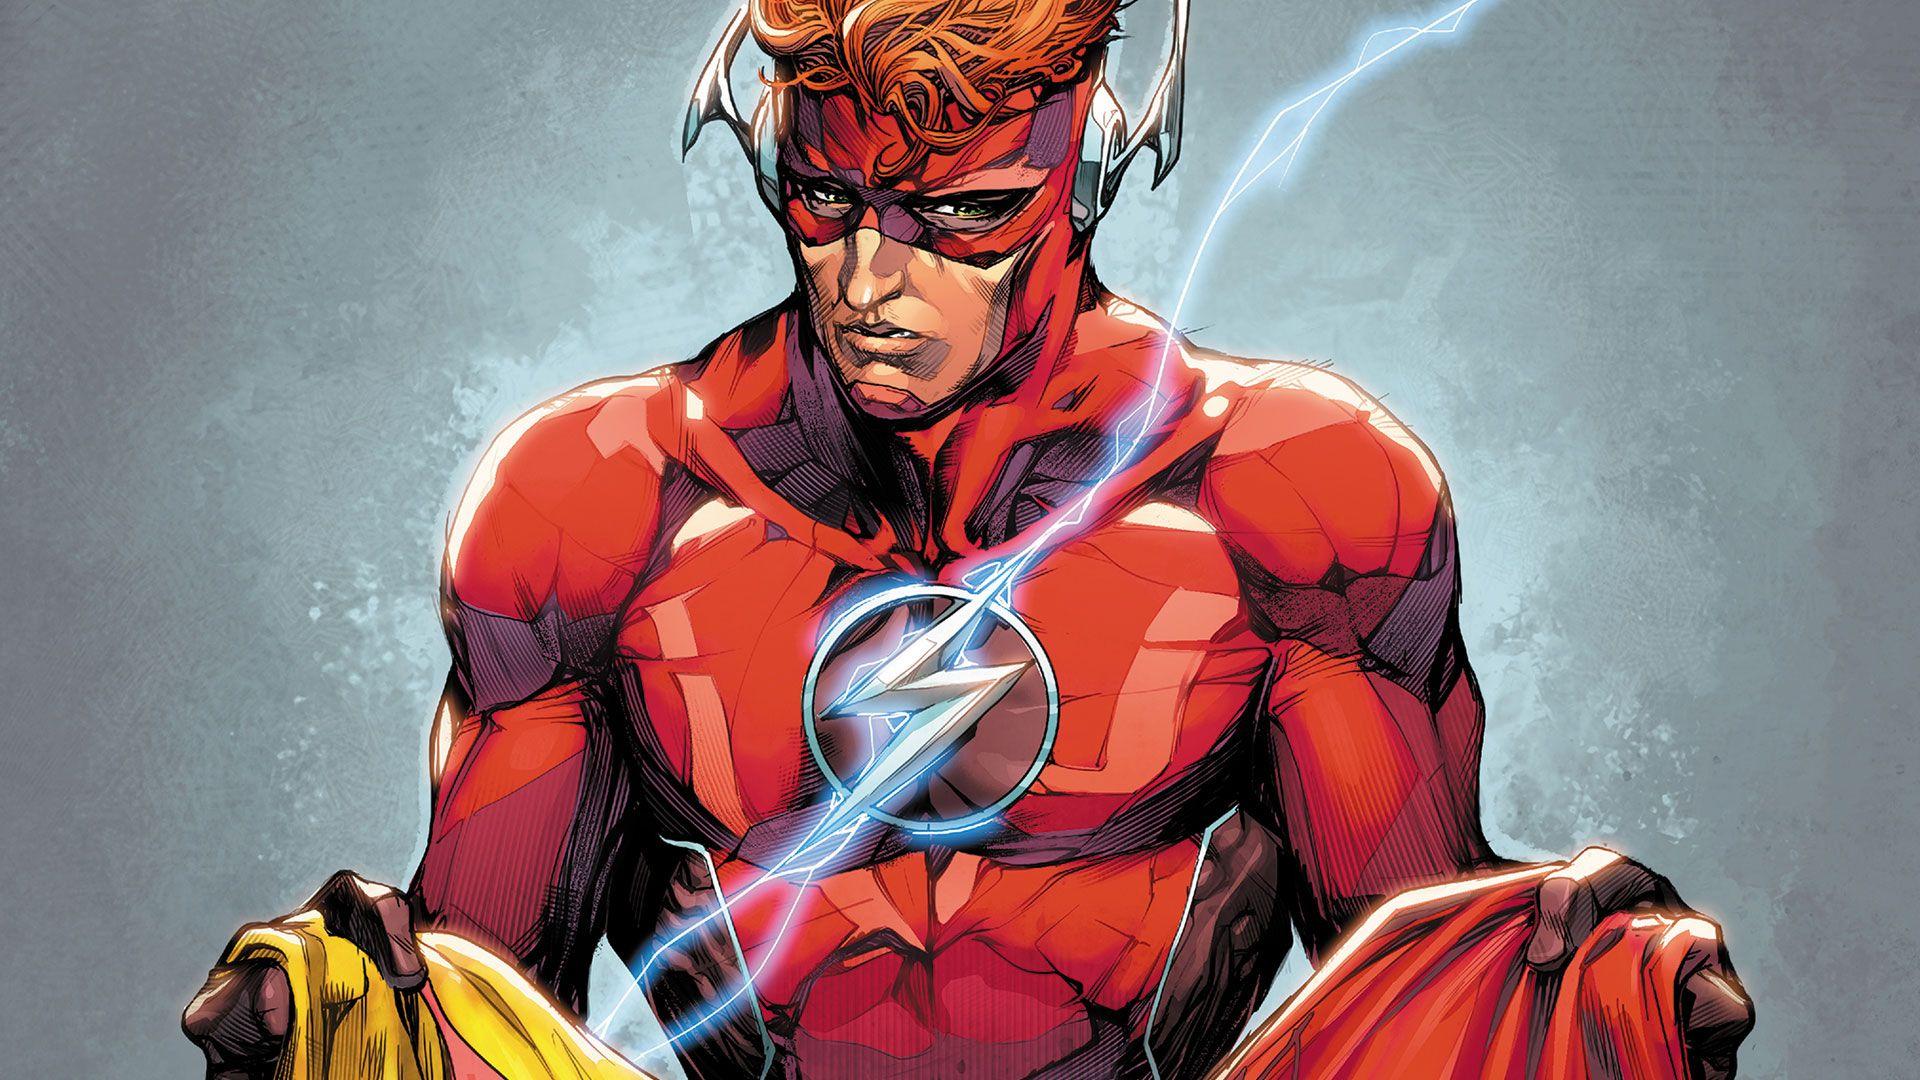 Wally West wallpapers for desktop download free Wally West pictures and  backgrounds for PC  moborg